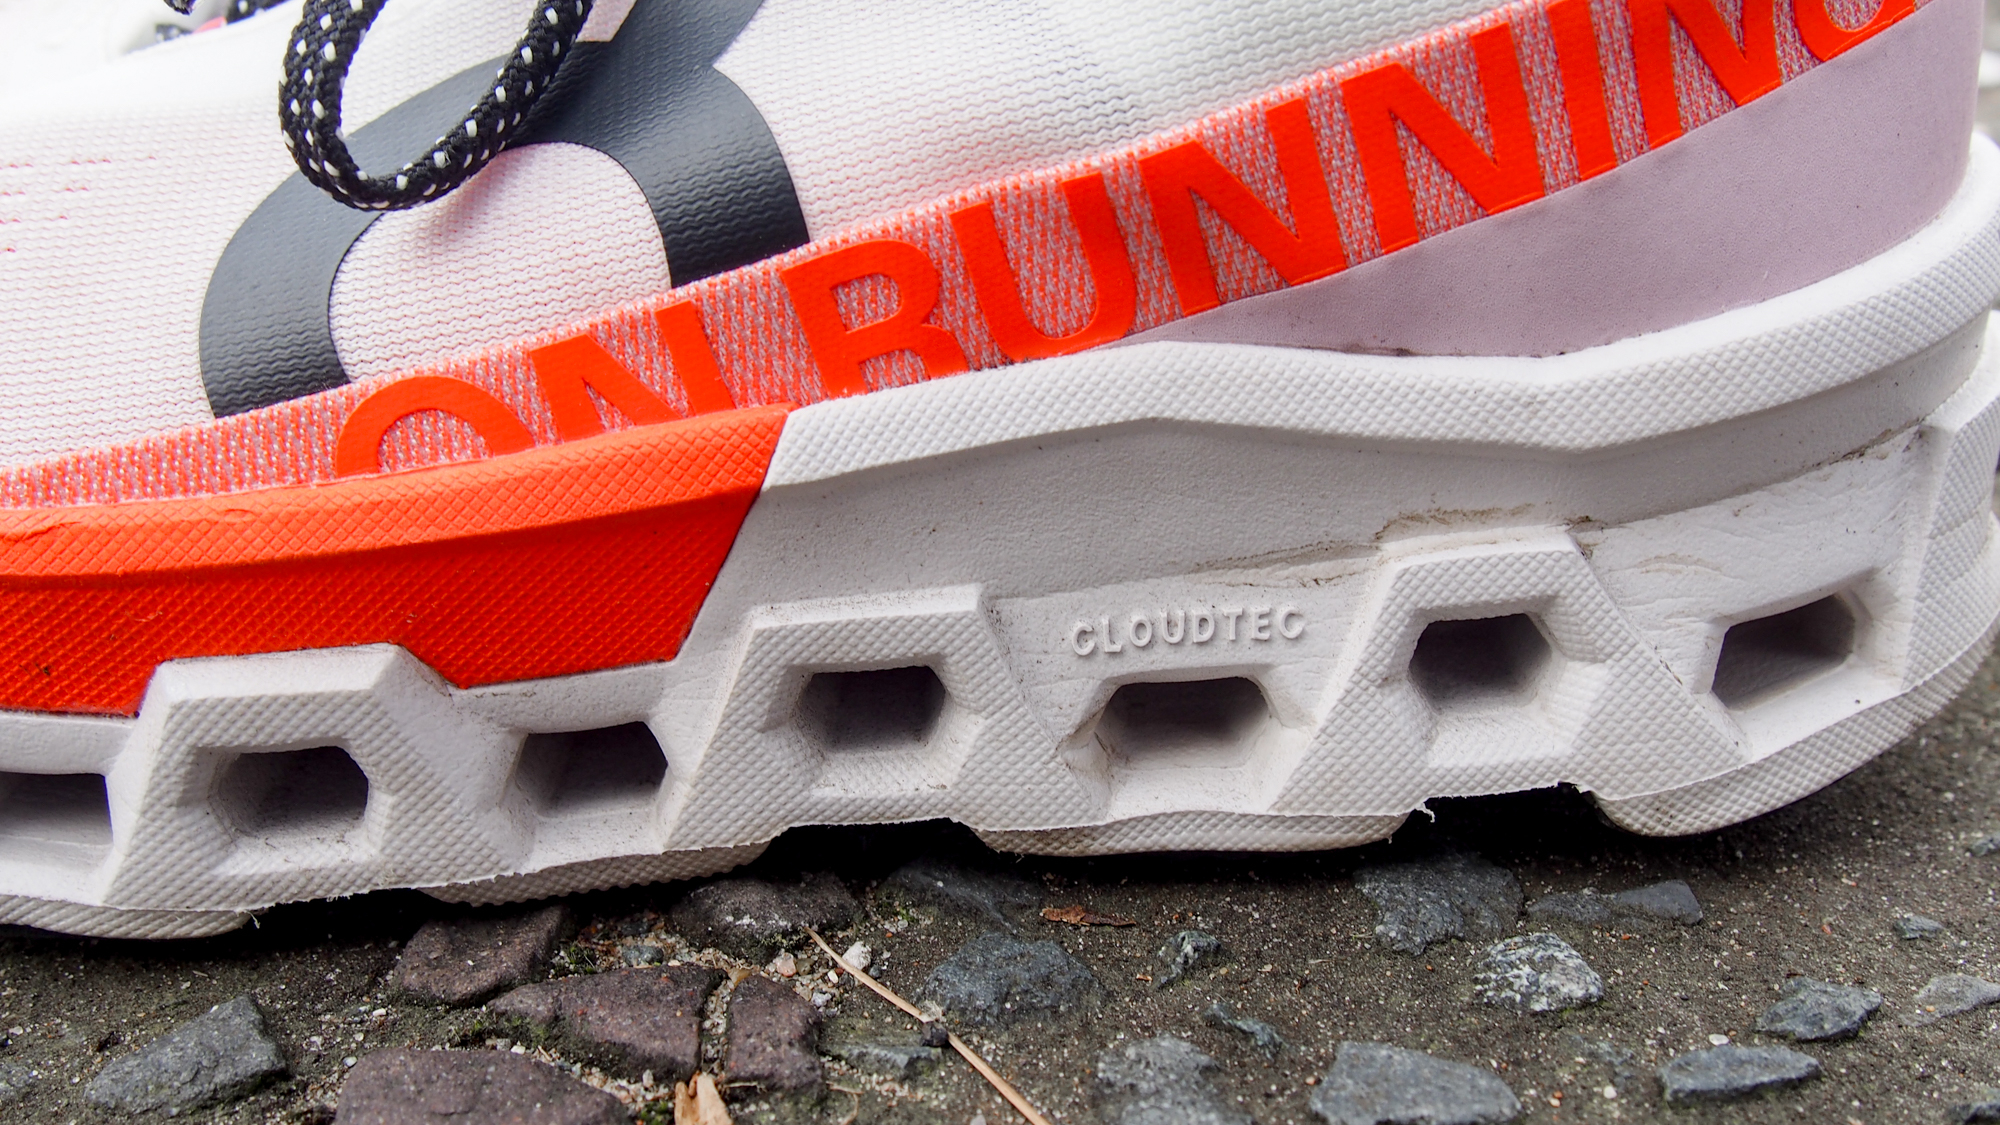 The On Cloudmonster 2 midsole